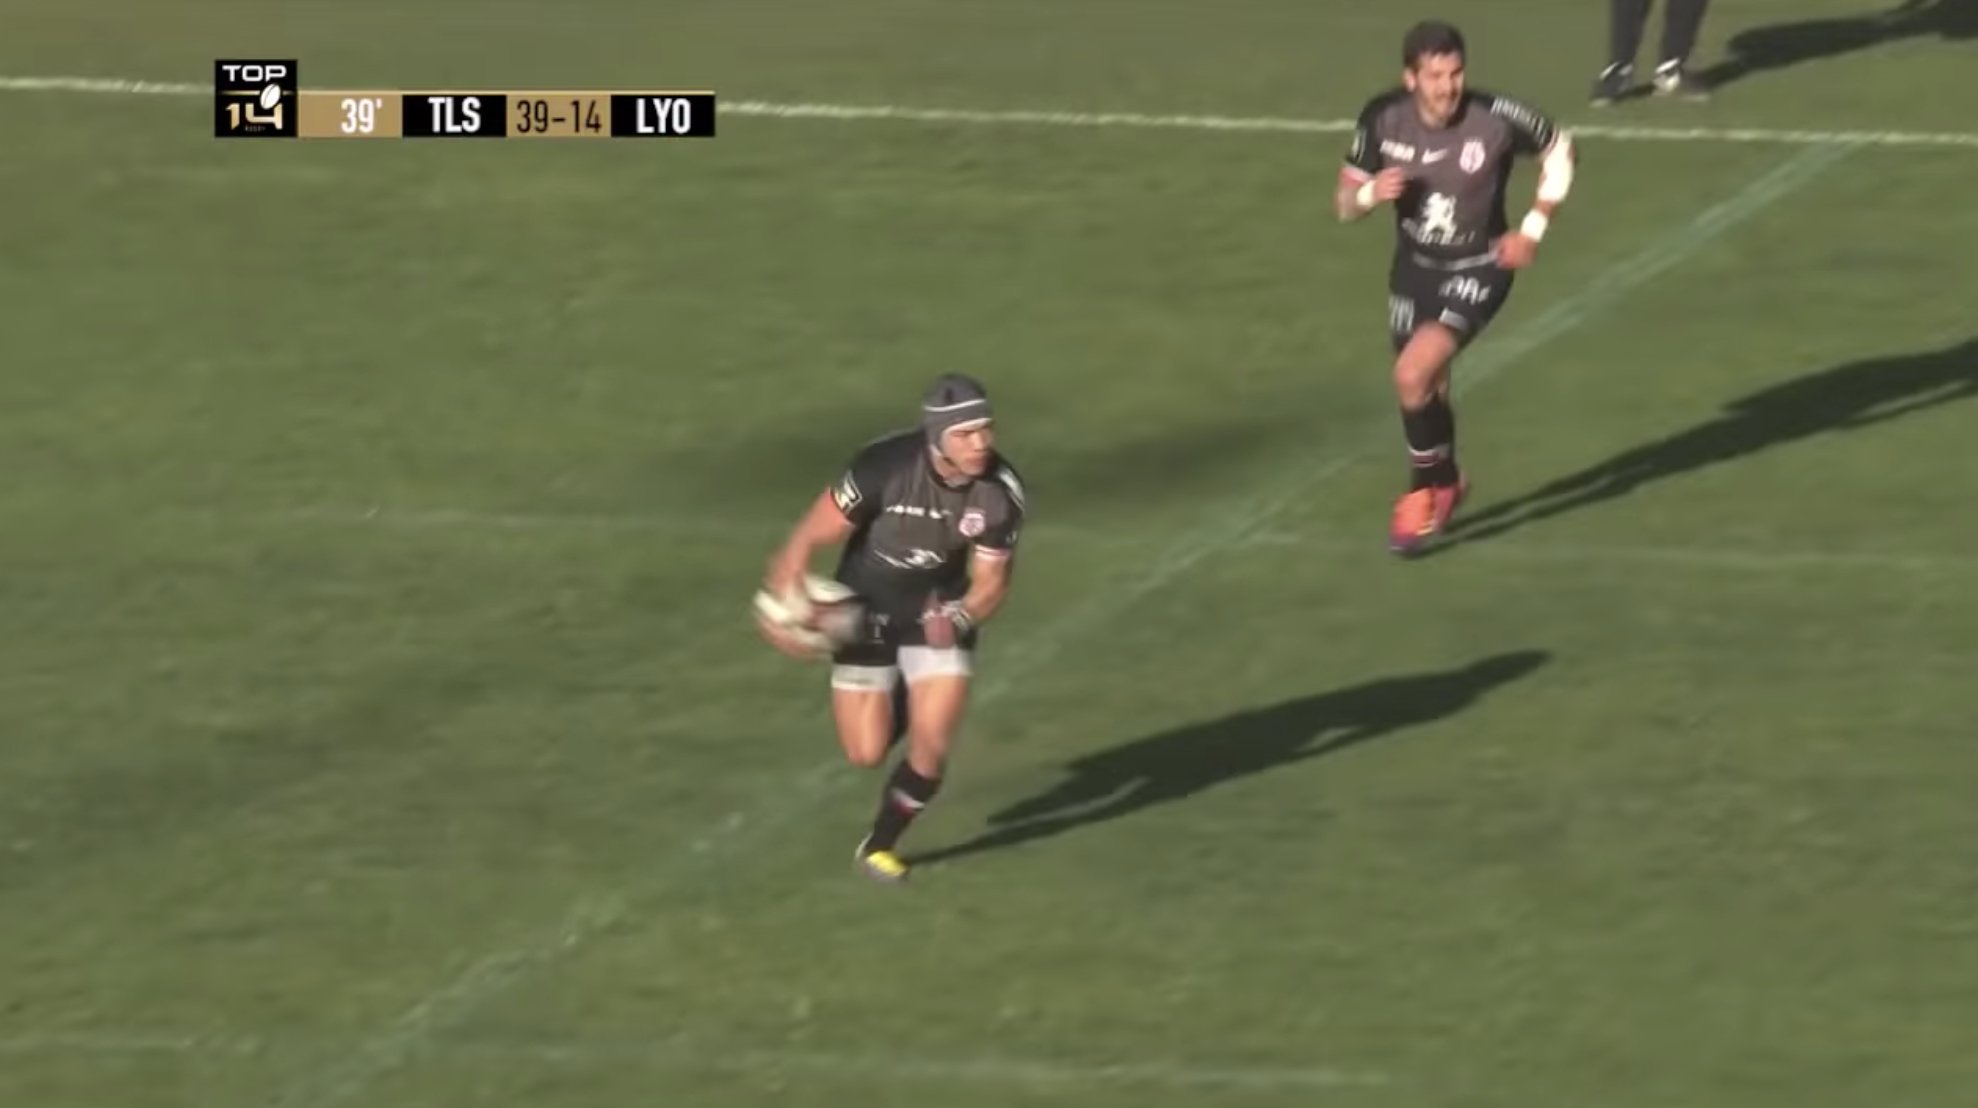 WATCH: Cheslin Kolbe beats defenders for fun in yet another outstanding run from the South Africa winger